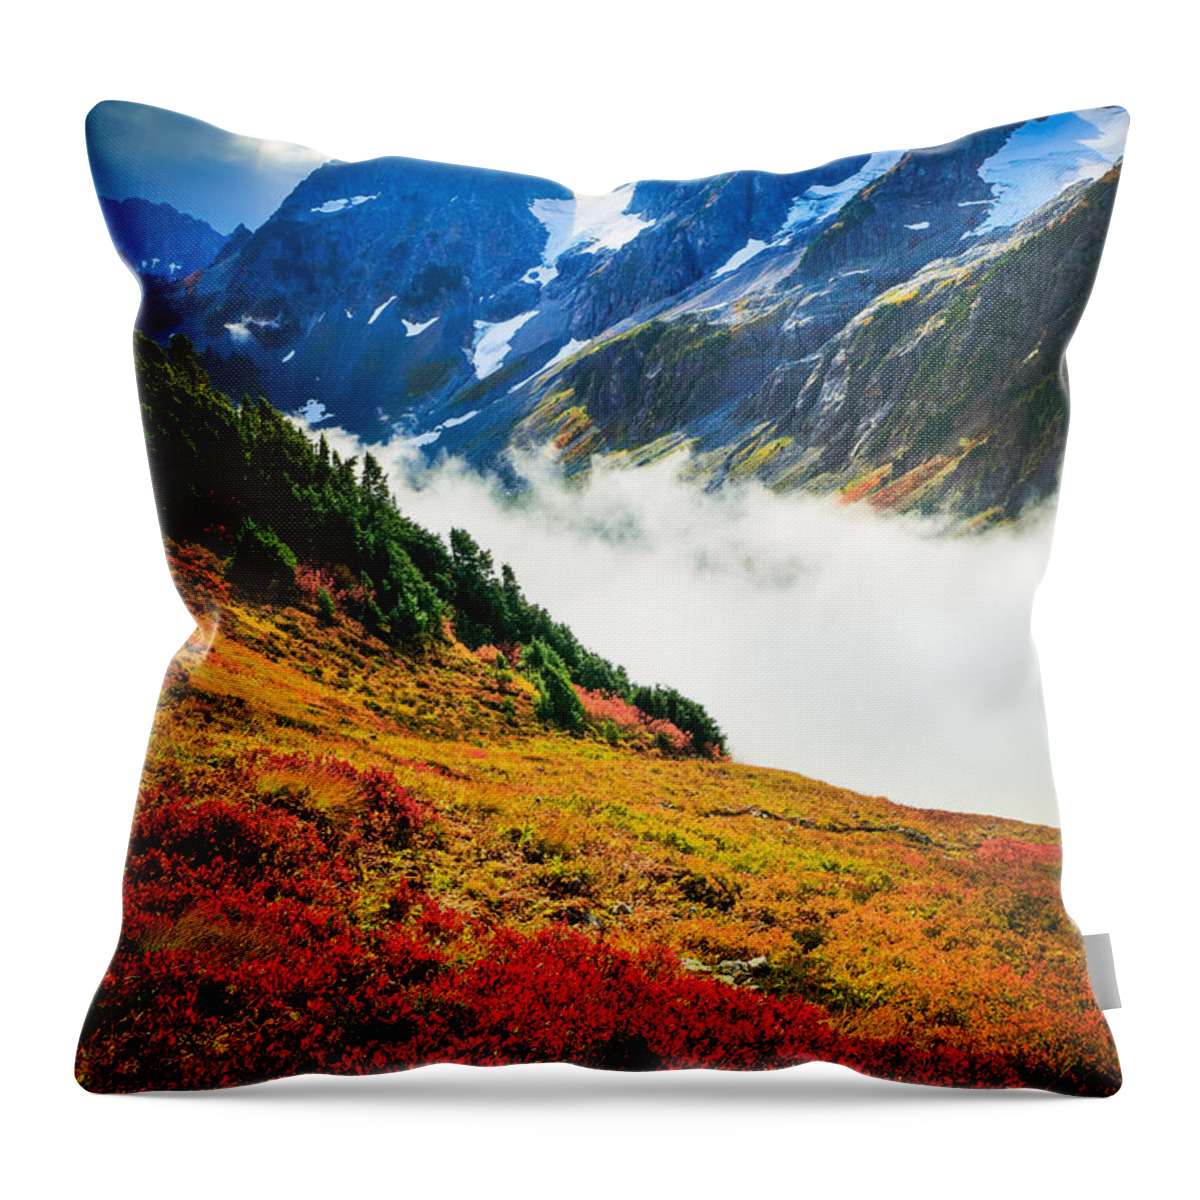 America Throw Pillow featuring the photograph Cascade Pass Peaks by Inge Johnsson